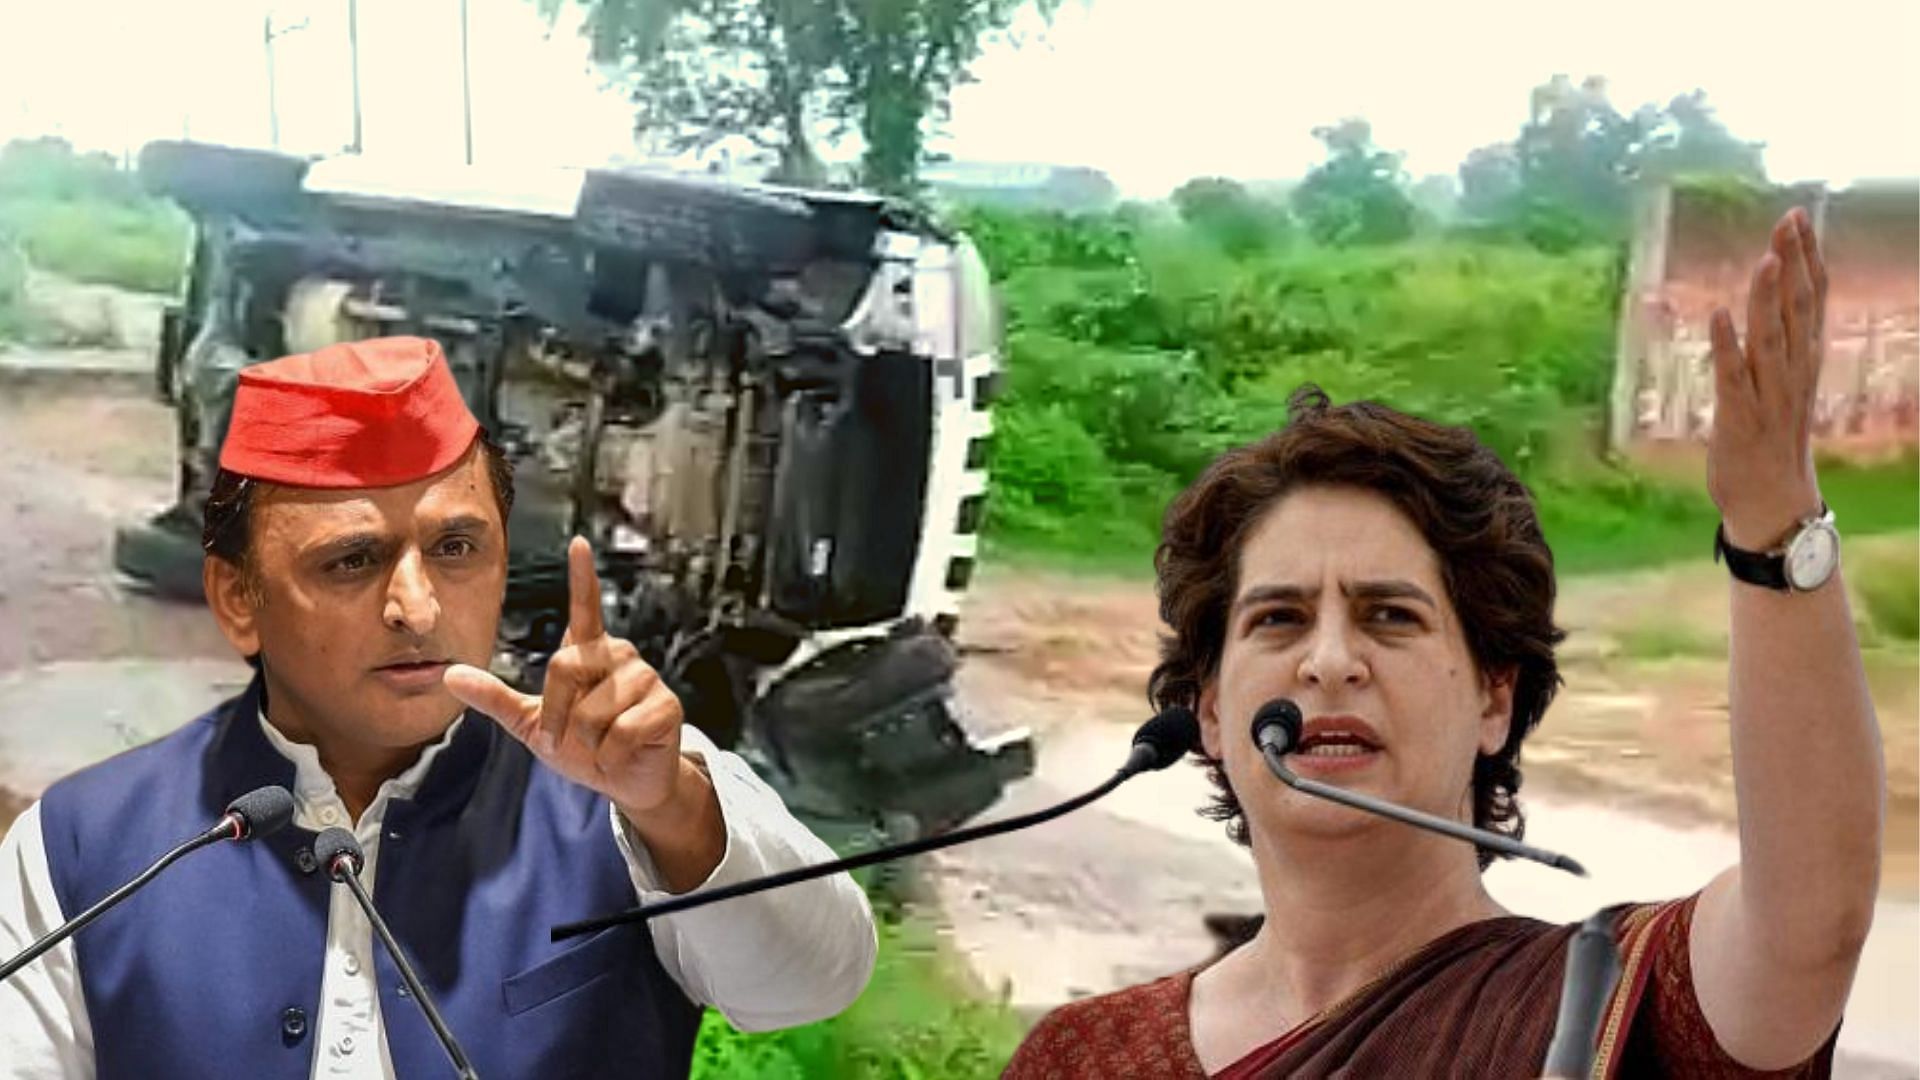 Samajwadi Party chief Akhilesh Yadav tweeted, “Actually the car did not overturned, the government has been saved from the turning over of secrets.”